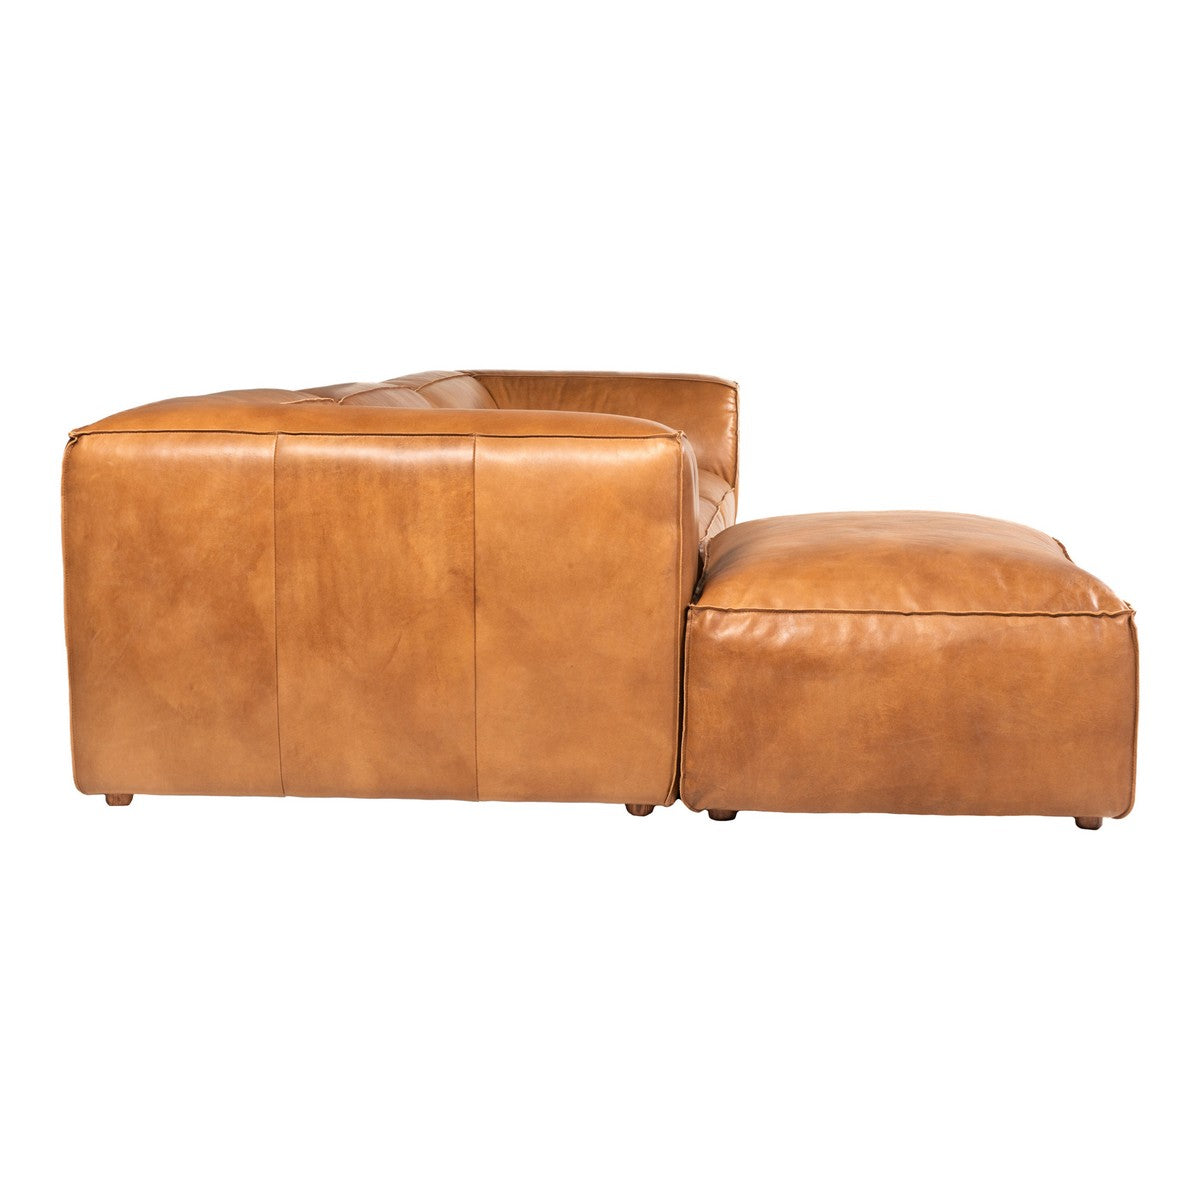 Moe's Home Collection Luxe Lounge Modular Sectional Tan - QN-1023-40